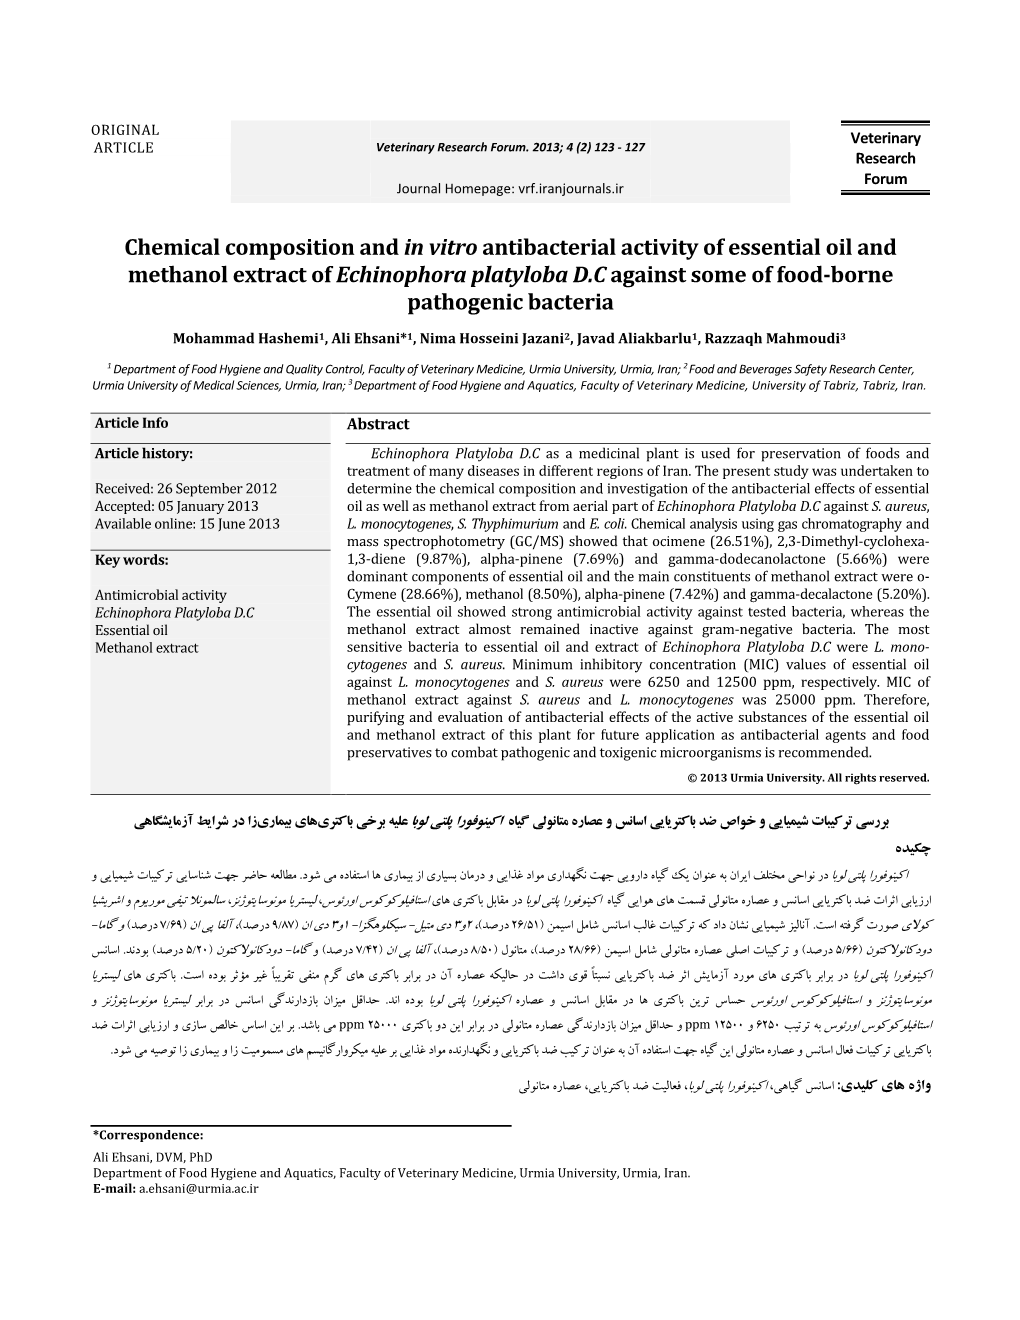 Chemical Composition and in Vitro Antibacterial Activity of Essential Oil and Methanol Extract of Echinophora Platyloba D.C Agai